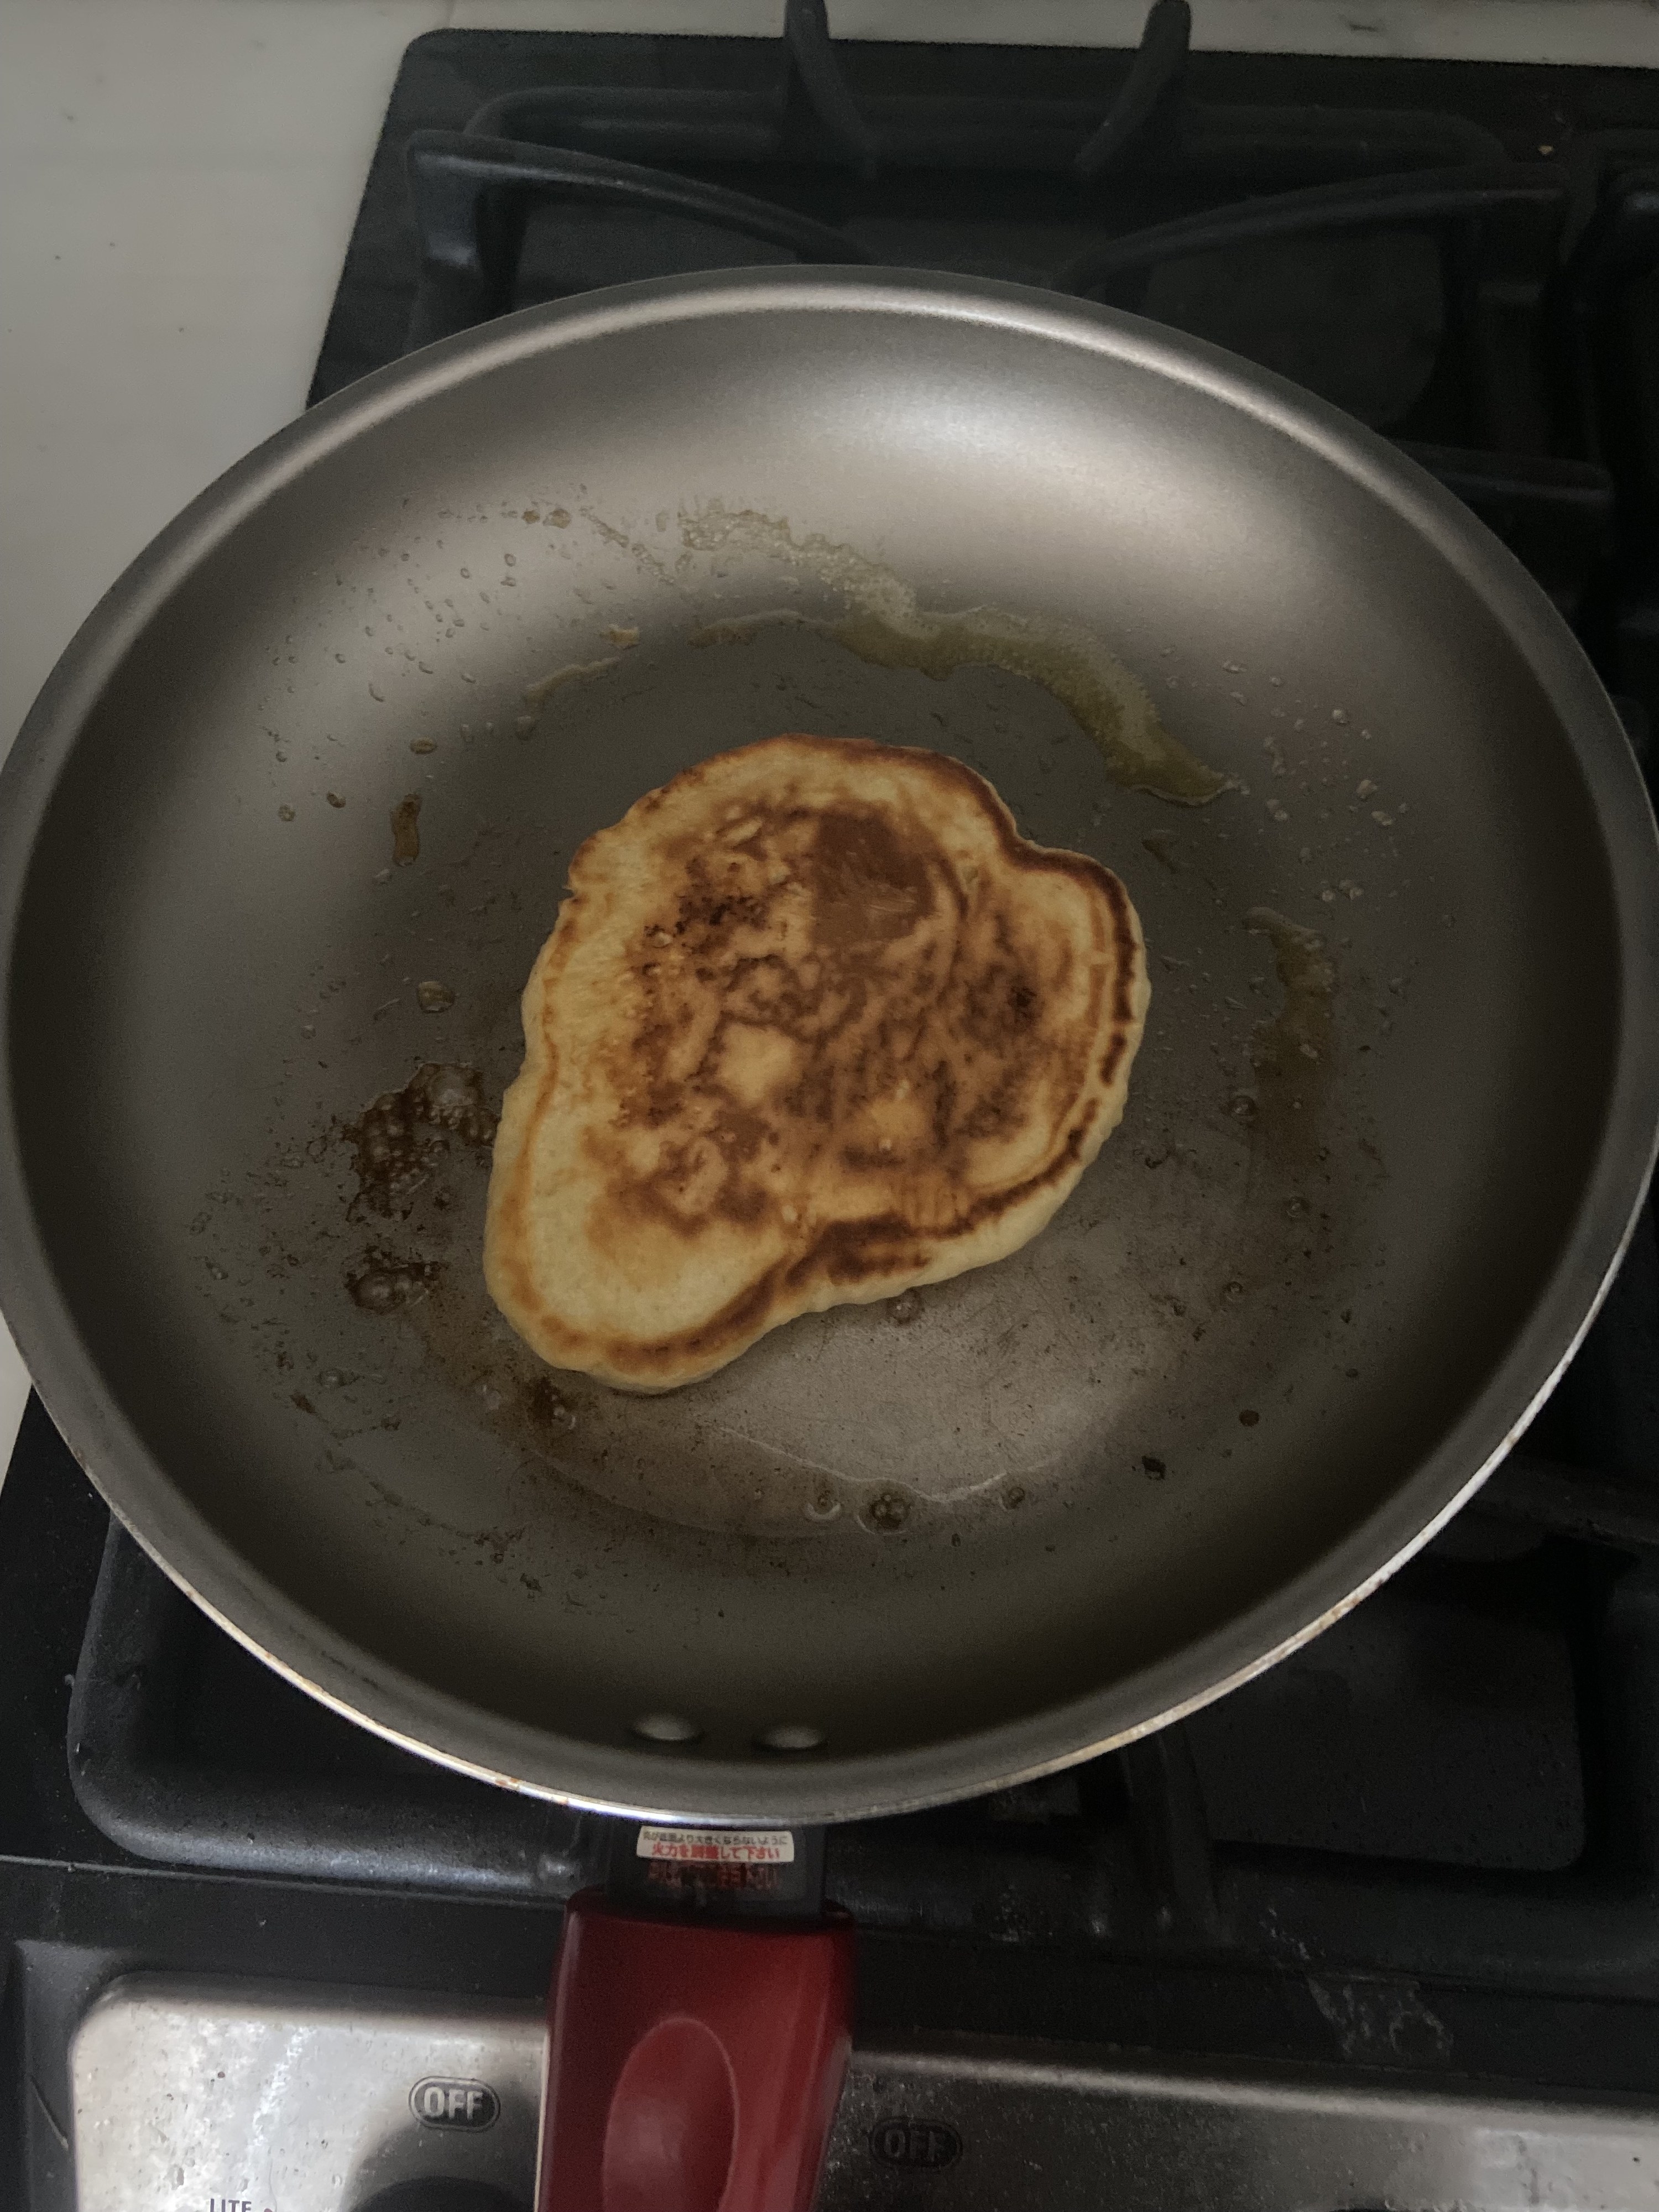 The pancake has an odd shape and looks a bit burned in the middle